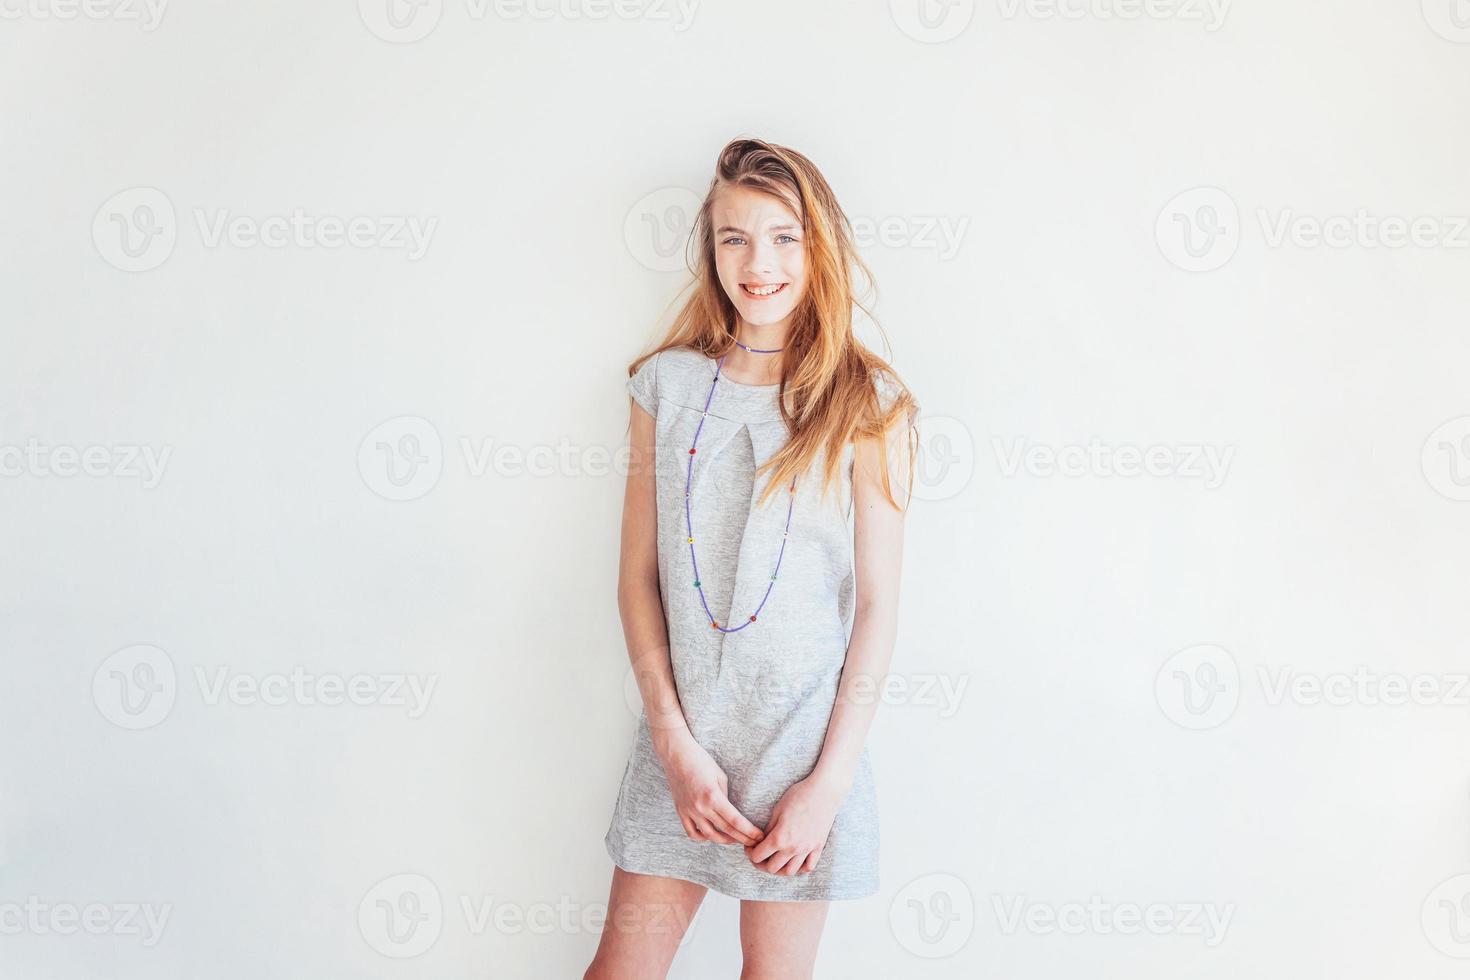 Happy teenage girl smiling. Closeup portrait young happy positive teen woman in grey dress against white wall background. European woman. Positive human emotion facial expression body language. photo